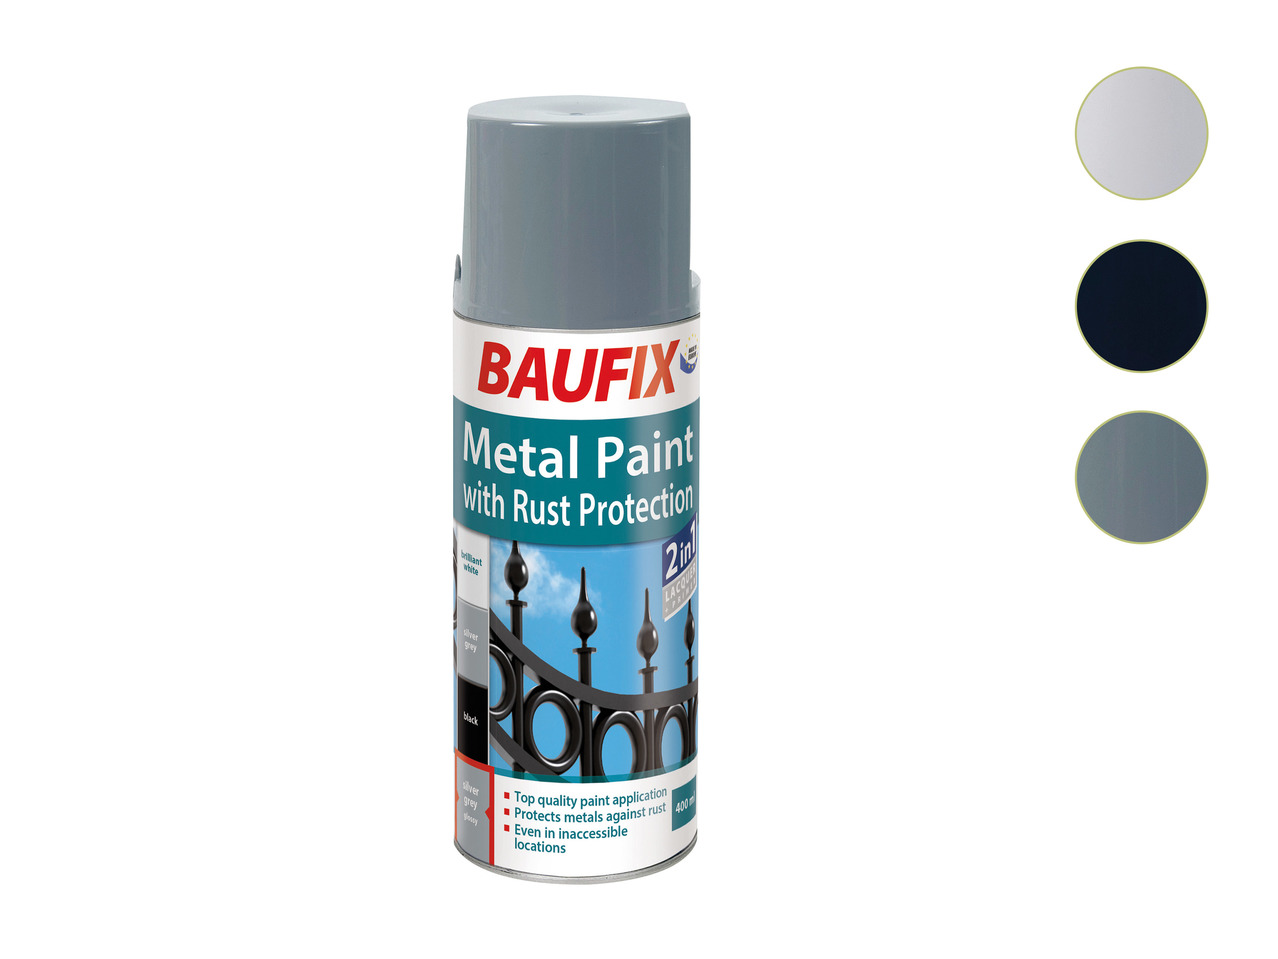 Baufix Metal Paint with Rust Protection1